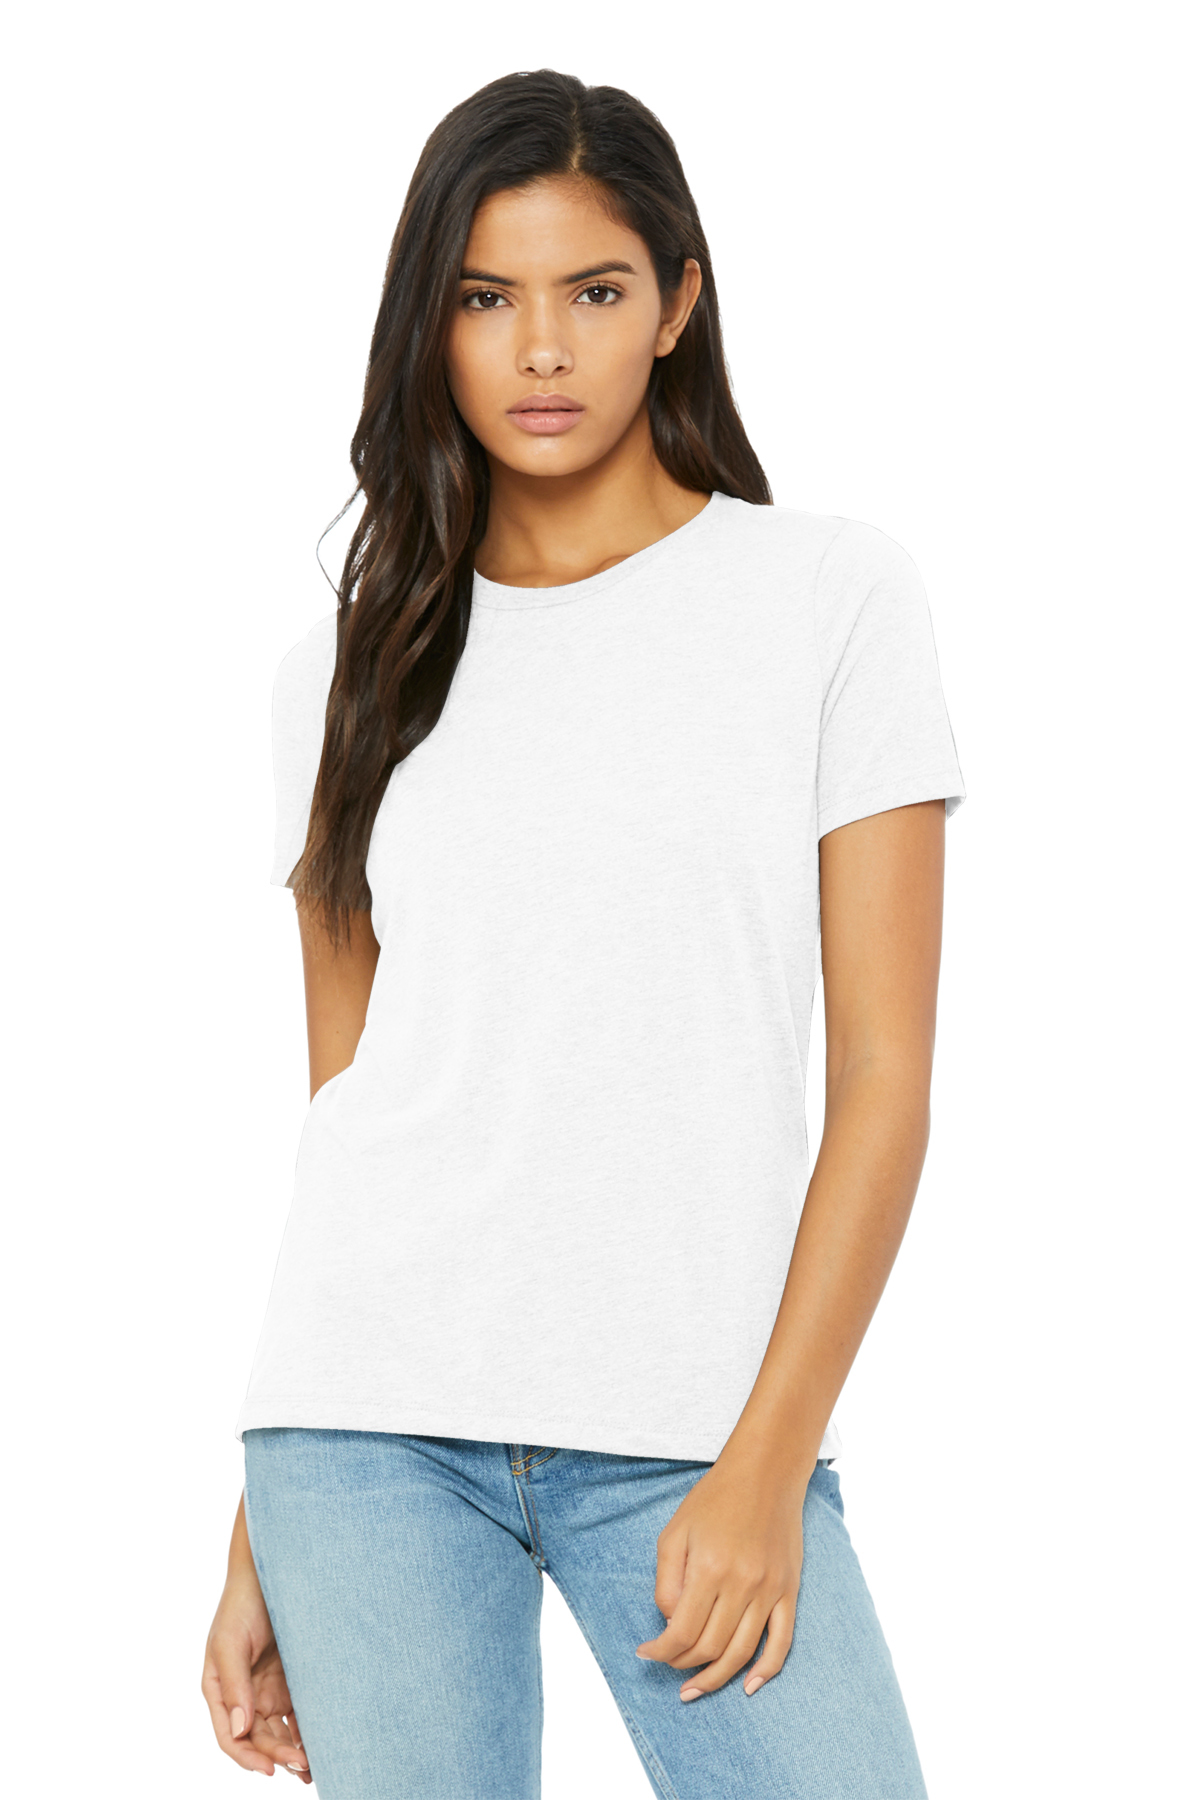 BELLA+CANVAS Women’s Relaxed Triblend Tee | Product | Company Casuals